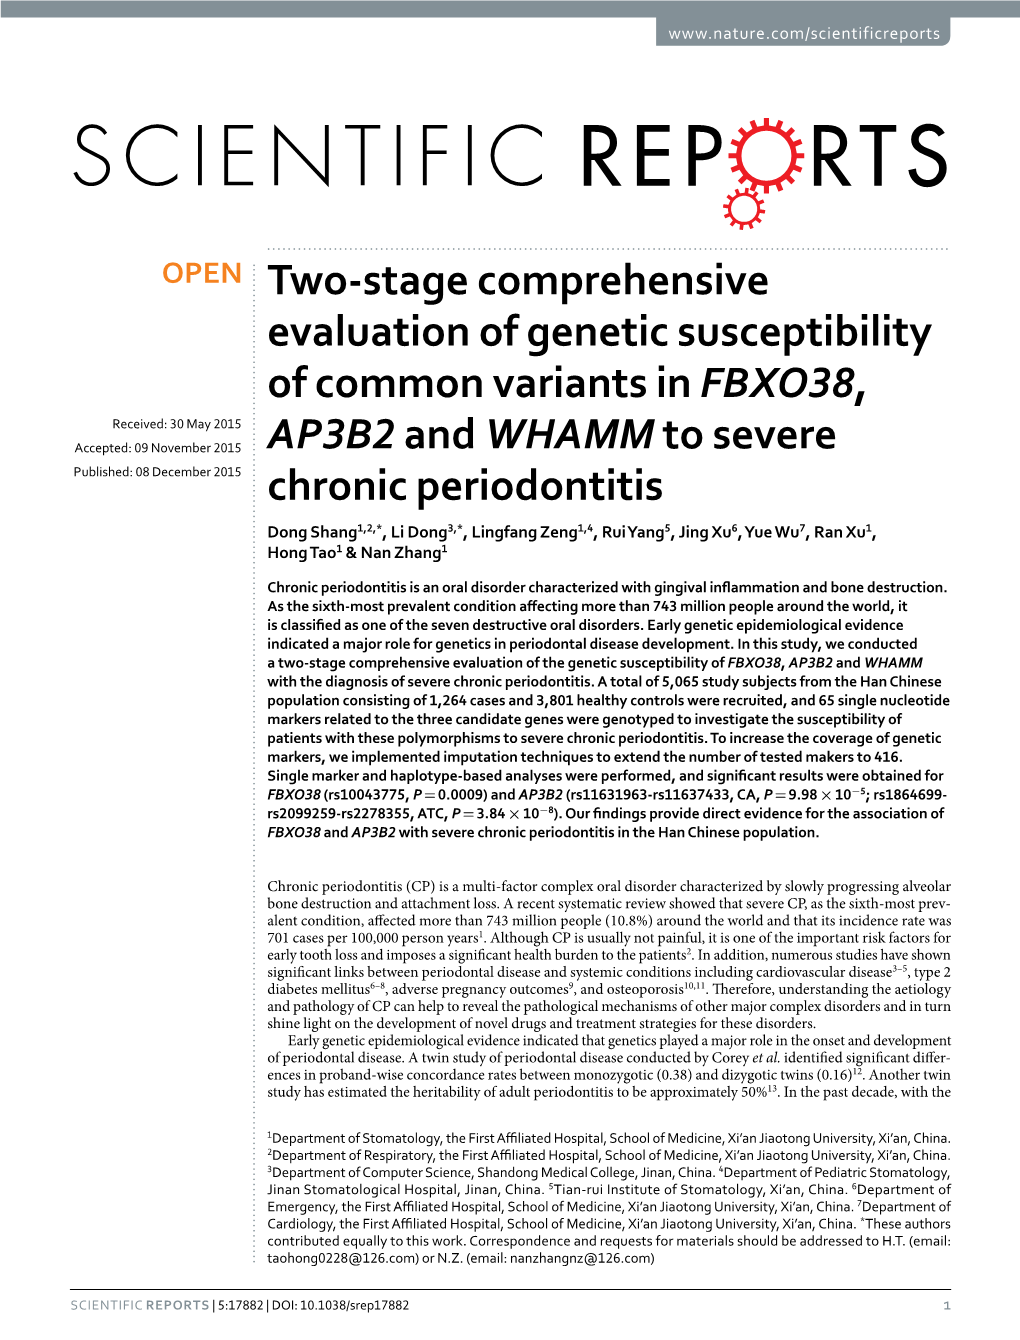 Two-Stage Comprehensive Evaluation of Genetic Susceptibility of Common